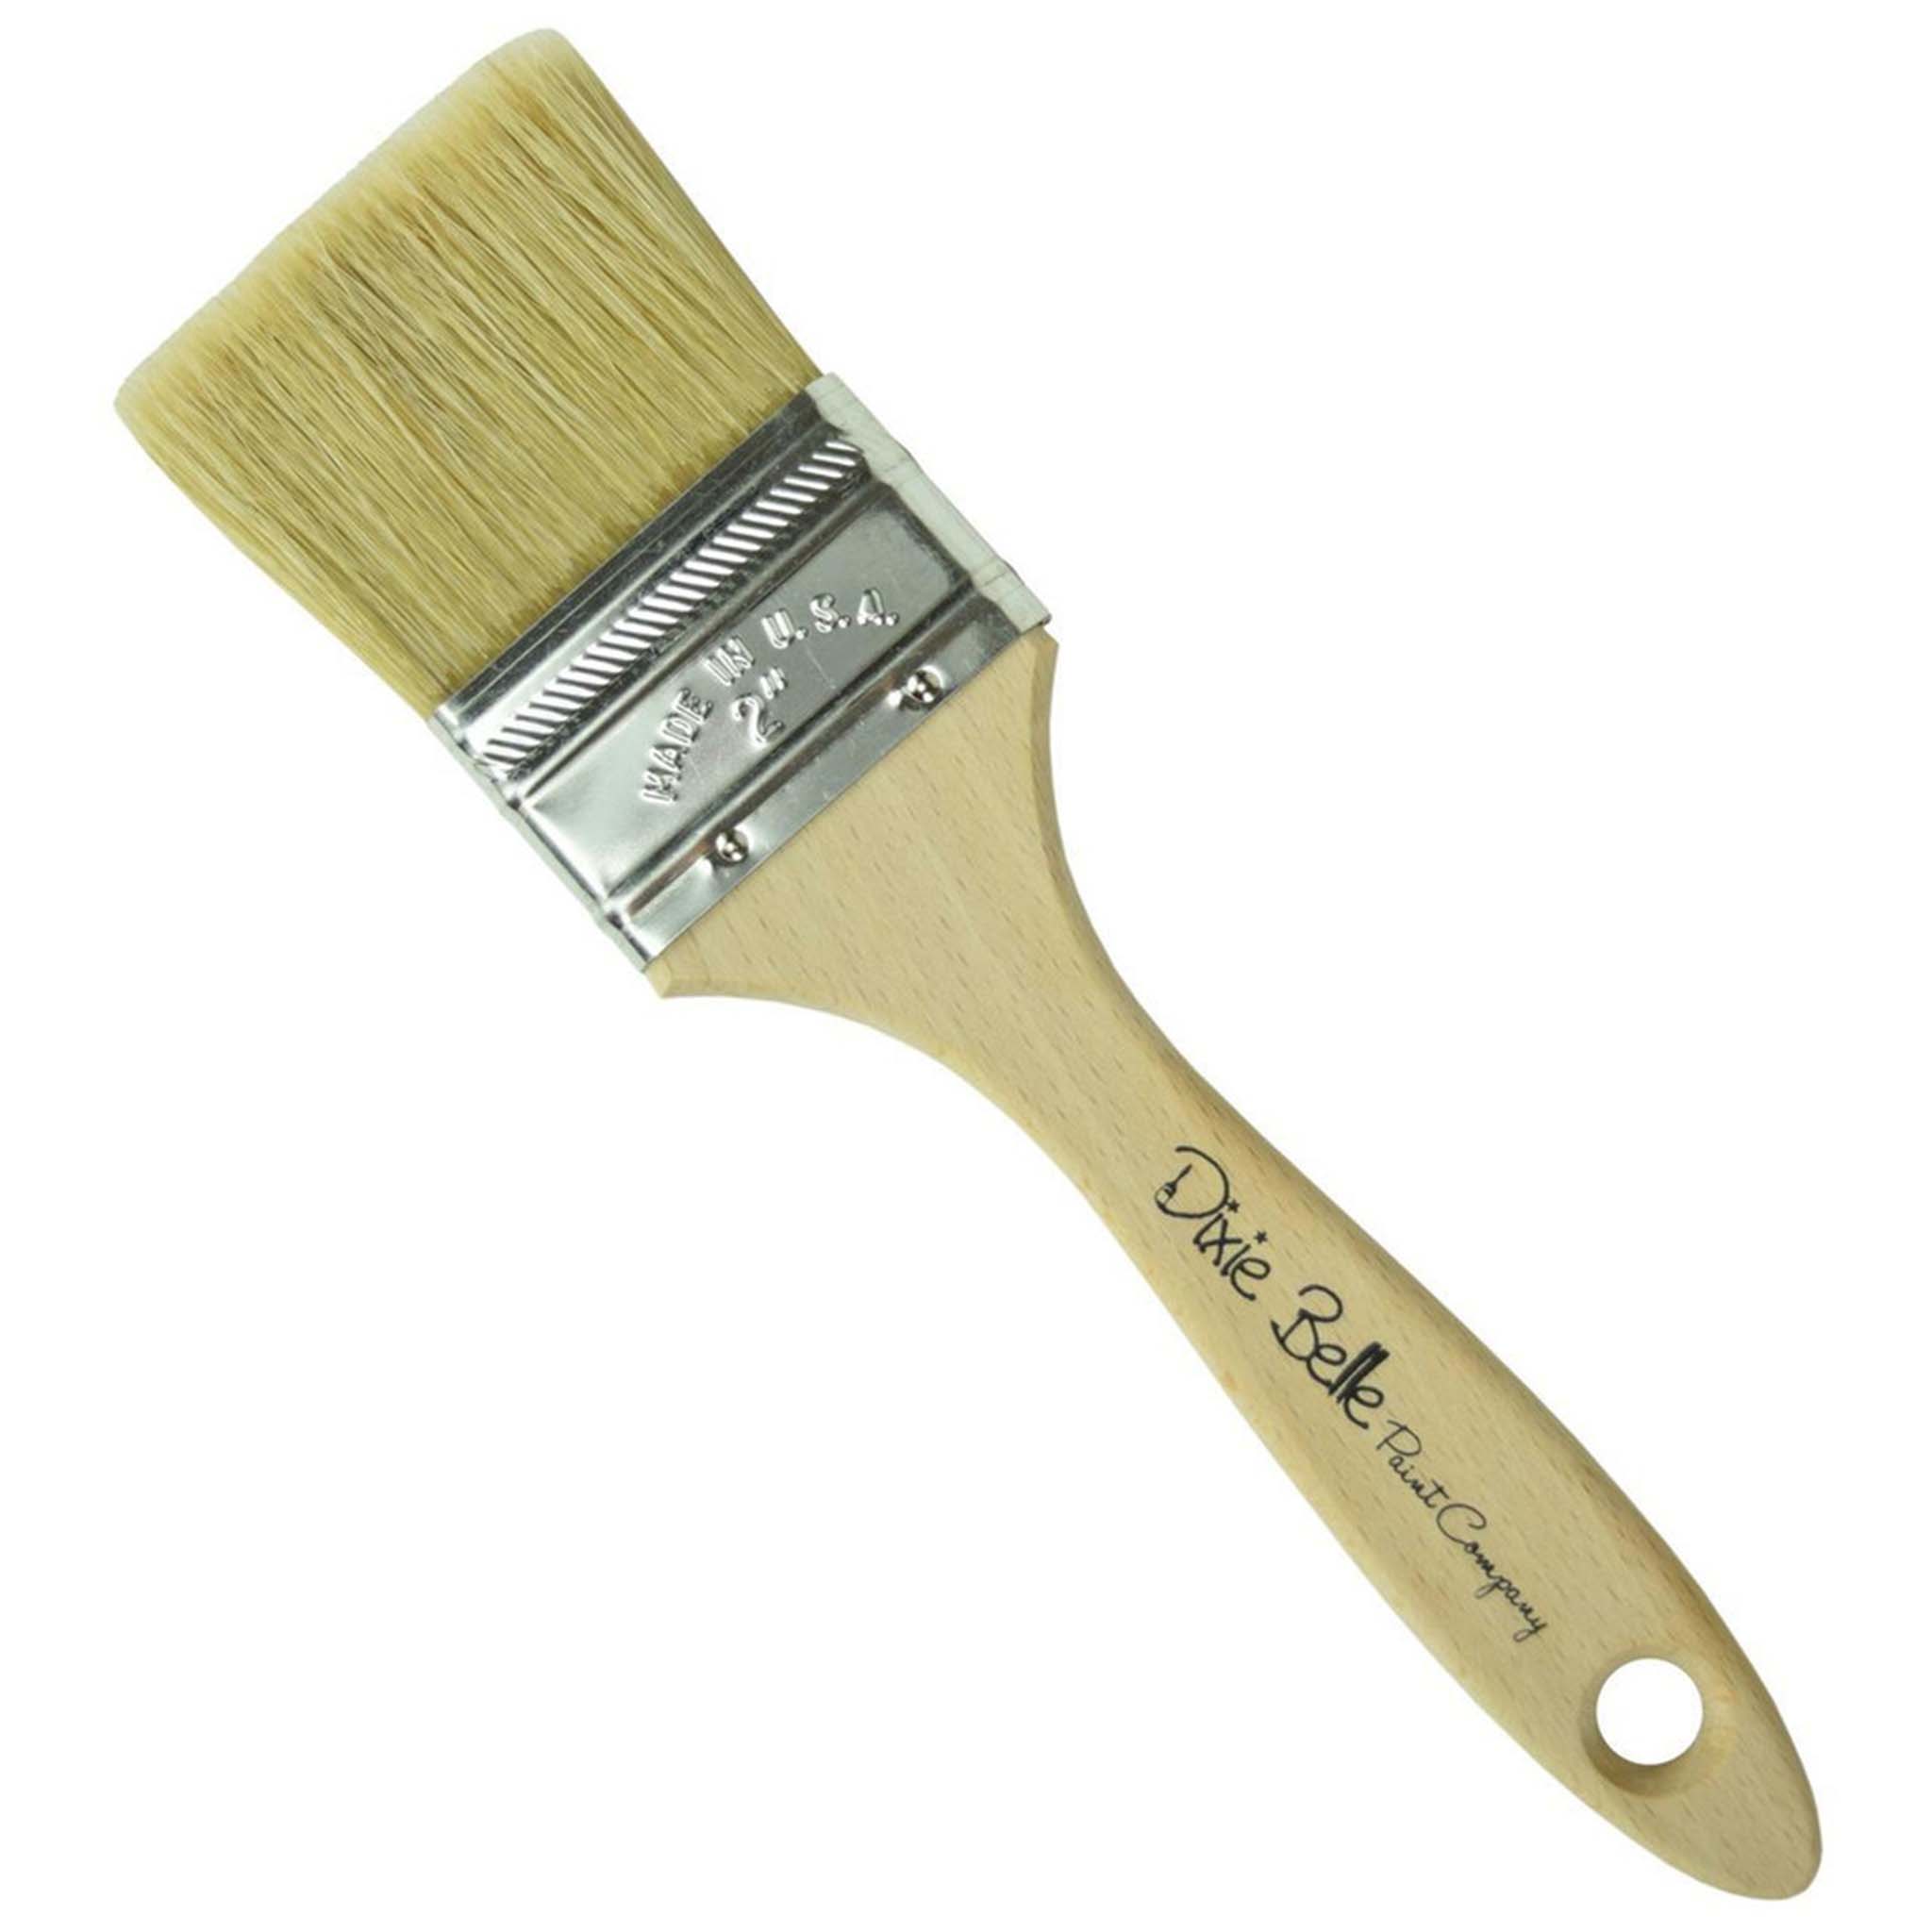 Dixie Belle Paint Company's Premium Chip Brush is against a white background.